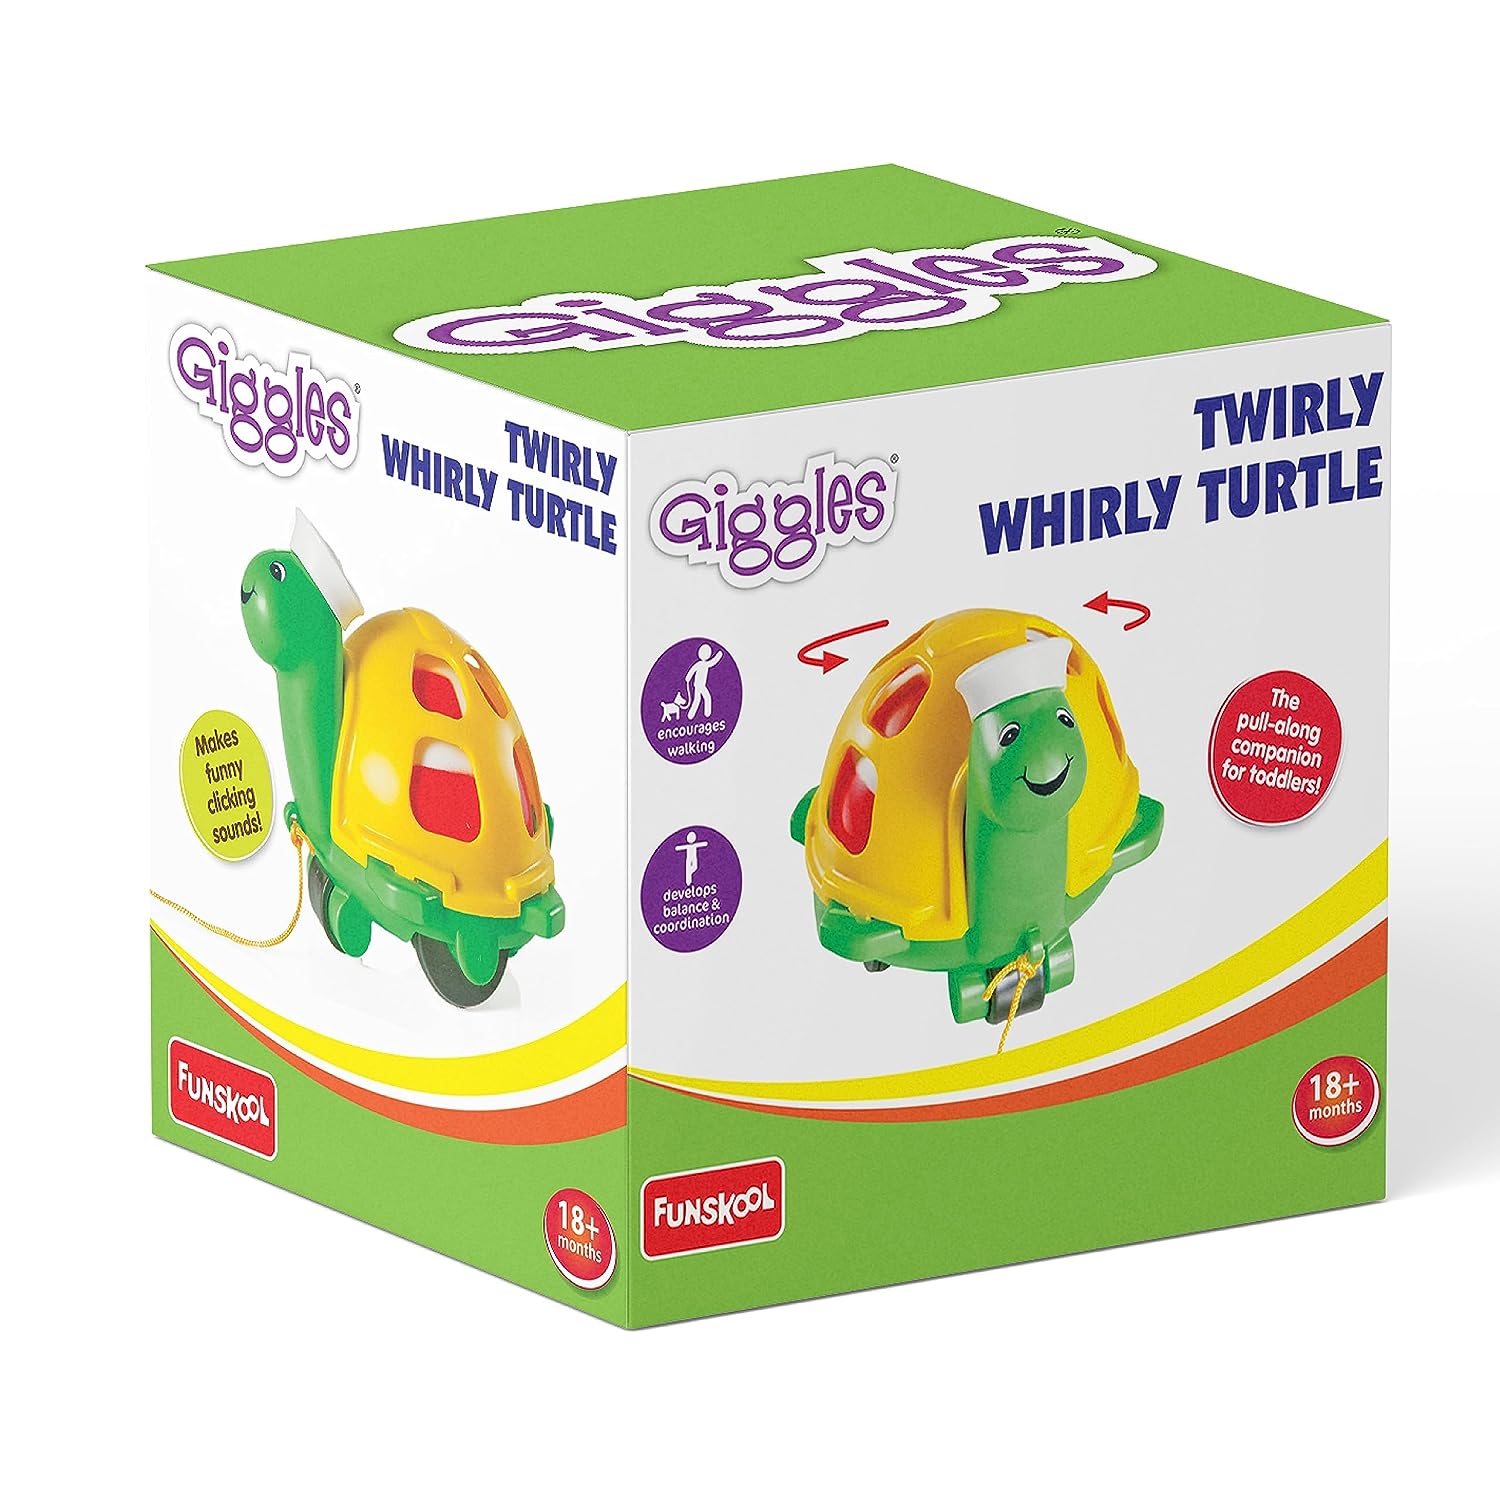 Giggles – Twirlly Whirlly Turtle, Pull along toy